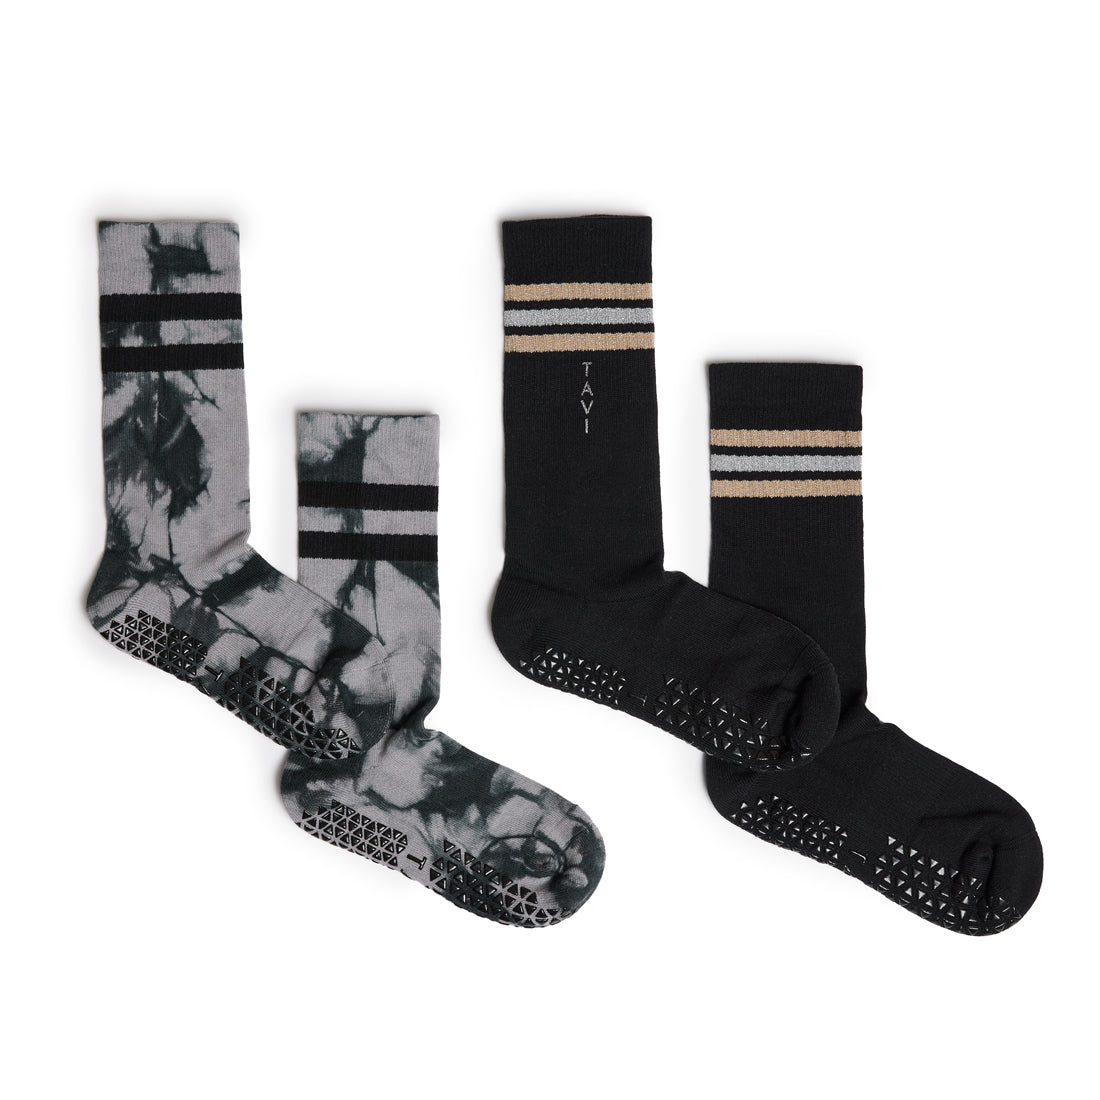 Mixed Styles Tie Dye 3 Pack Grip Socks - Tucketts - simplyWORKOUT –  SIMPLYWORKOUT